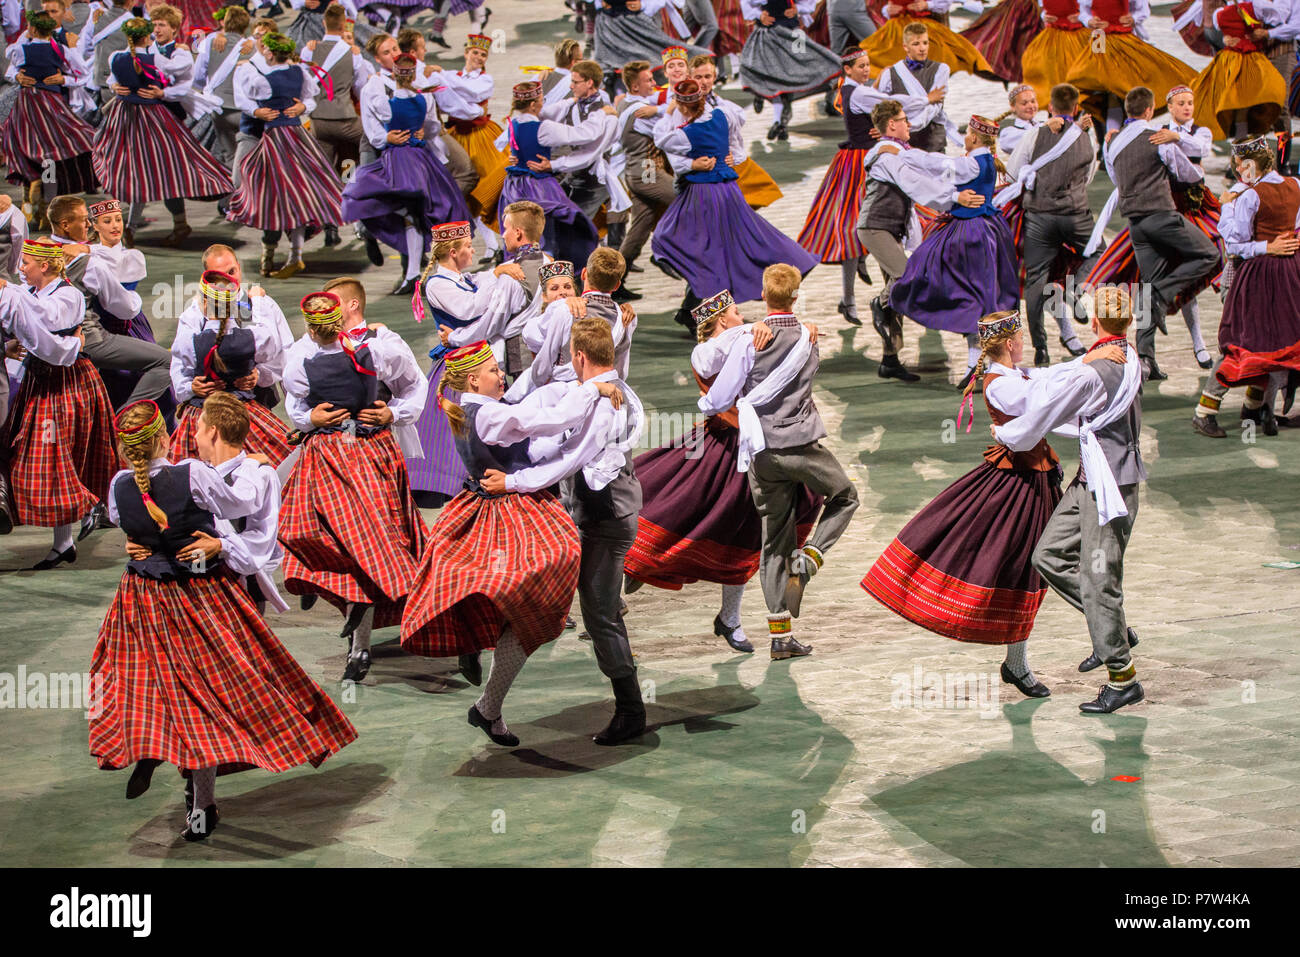 Riga, Latvia. 07th July, 2018. 07.07.2018. RIGA, LATVIA. Great Dance Concert "Mara’s Country", during The Song and Dance Celebration. Credit: Gints Ivuskans/Alamy Live News Credit: Gints Ivuskans/Alamy Live News Stock Photo